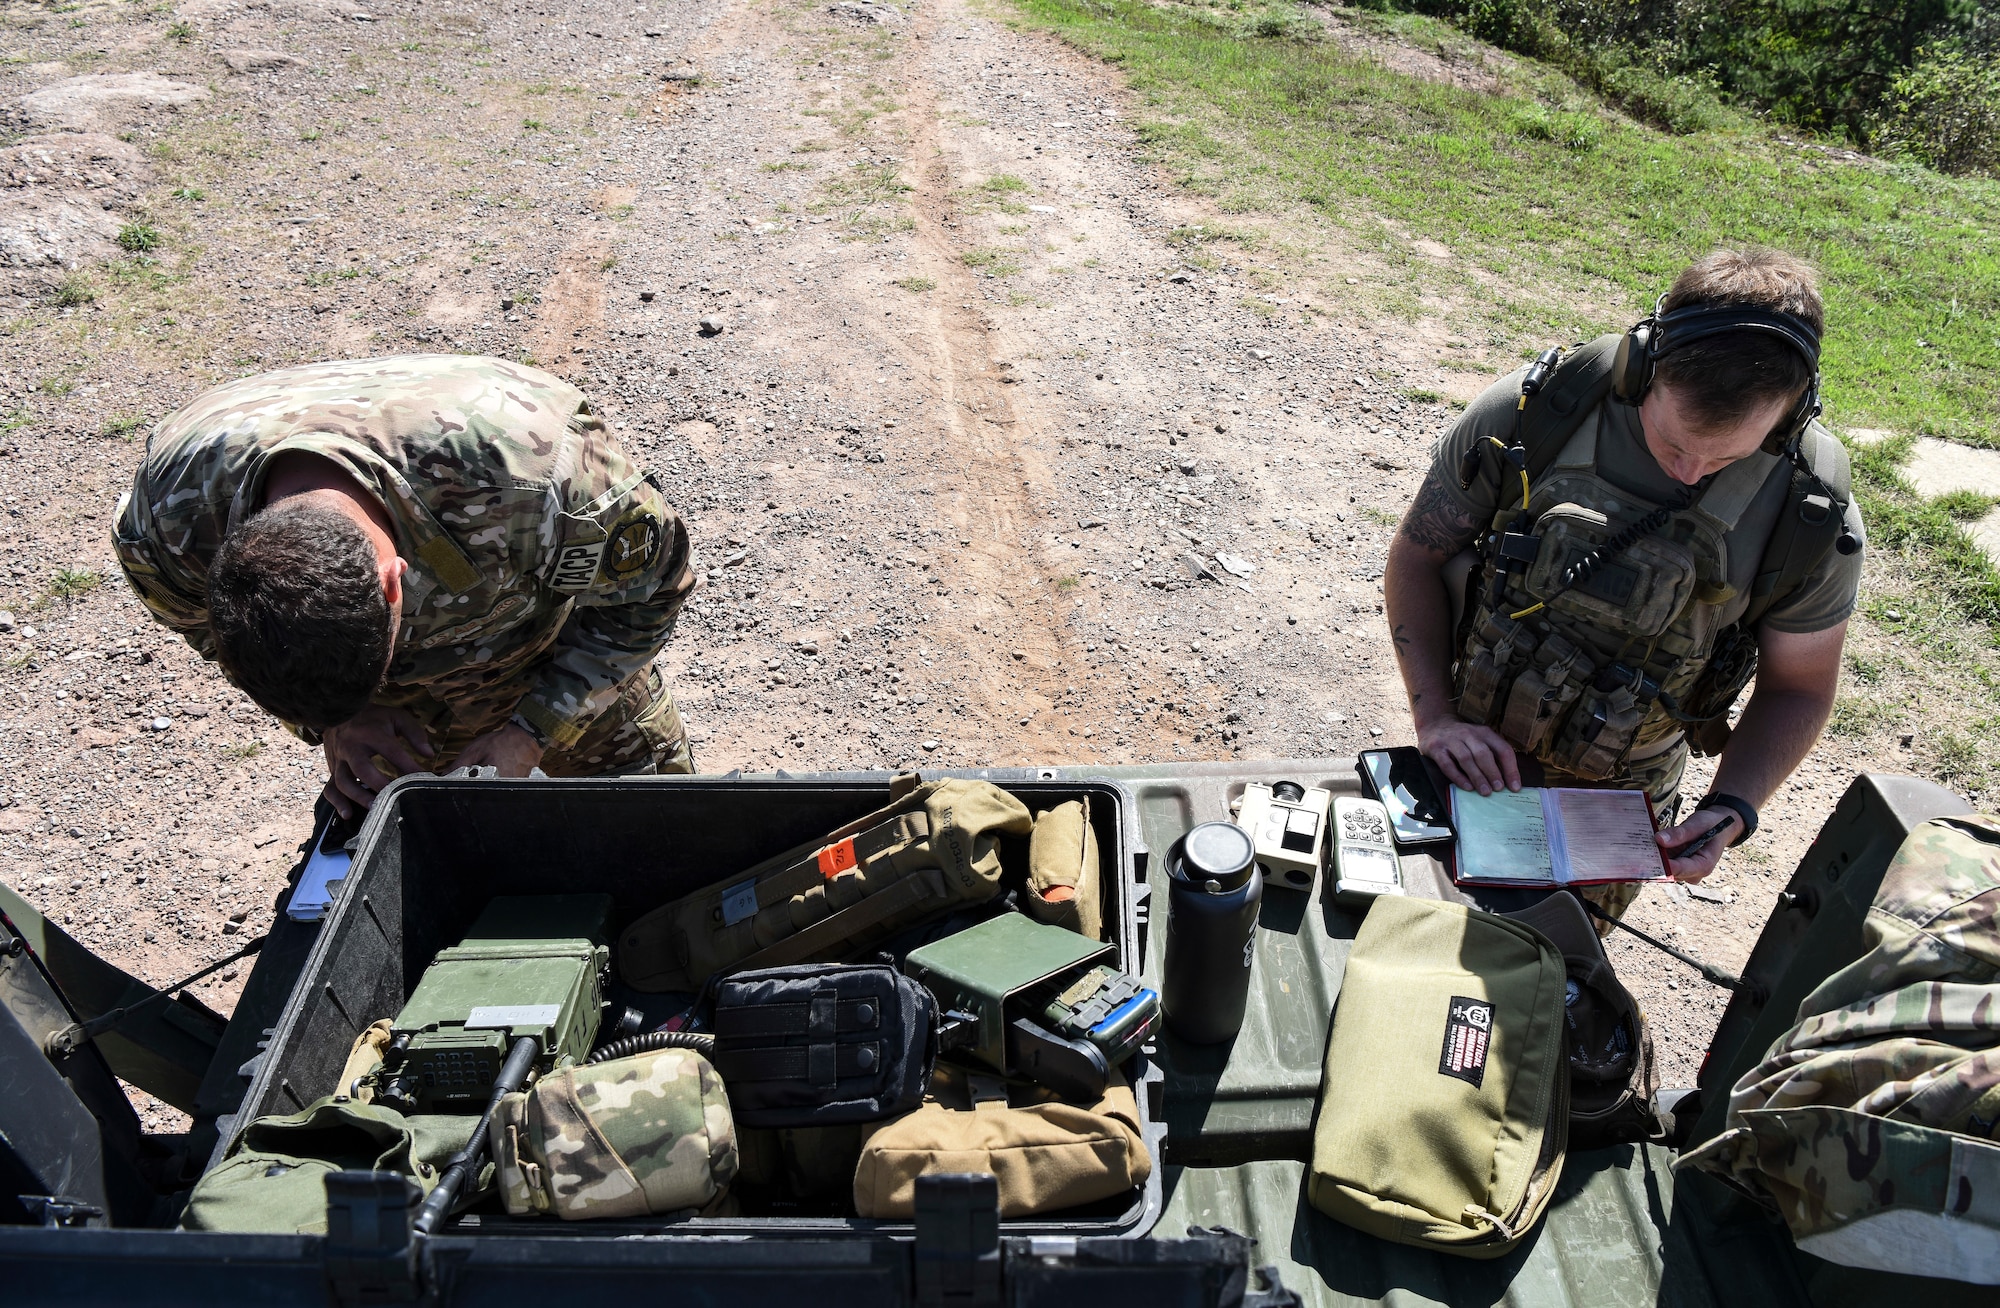 U.S. Air Force Staff Sgt. Thad Taylor (left), a tactical air control party specialist from the 15th Air Support Operations Squadron, Fort Stewart, Georgia, and 1st Lt. Clay West, 15th ASOS air liaison officer, set up a joint terminal attack controller training site Sept. 12, 2018 at Kunsan Air Base, Republic of Korea. The JTAC training objectives included ensuring deconfliction of friendly artillery, helicopters, and other aircraft. (U.S. Air Force photo by Senior Airman Savannah L. Waters)